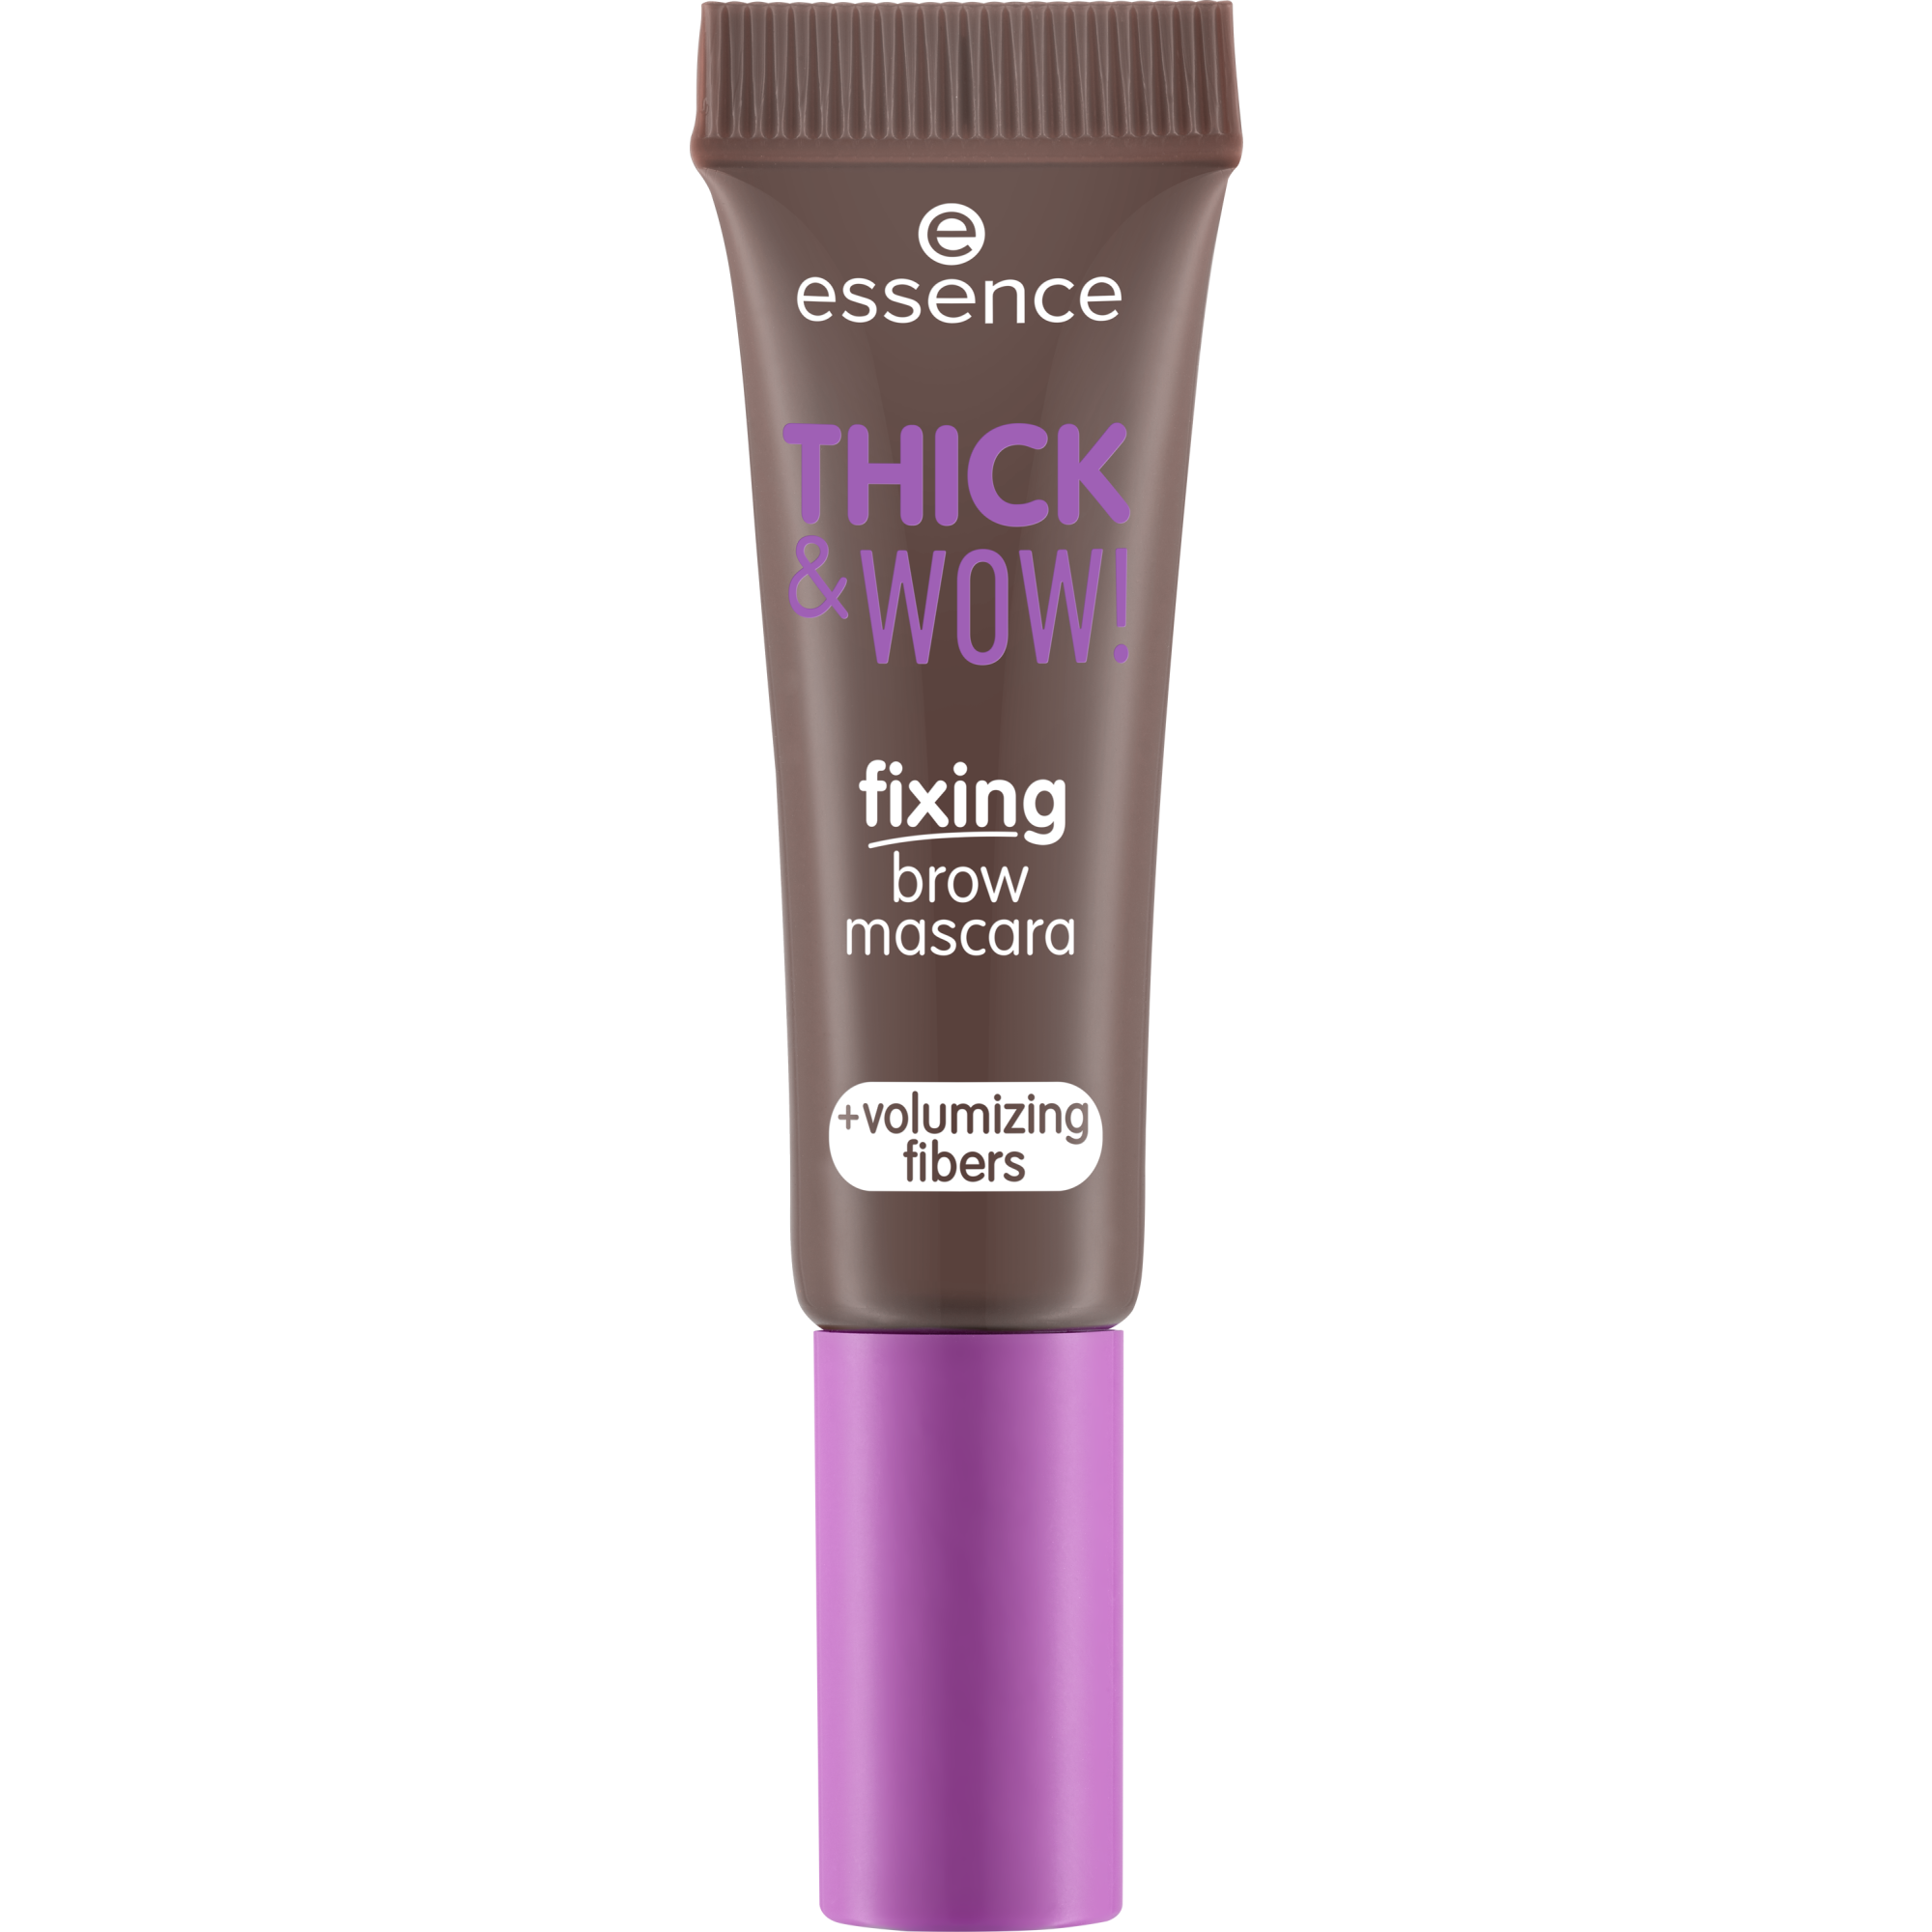 THICK & WOW! fixing brow mascara